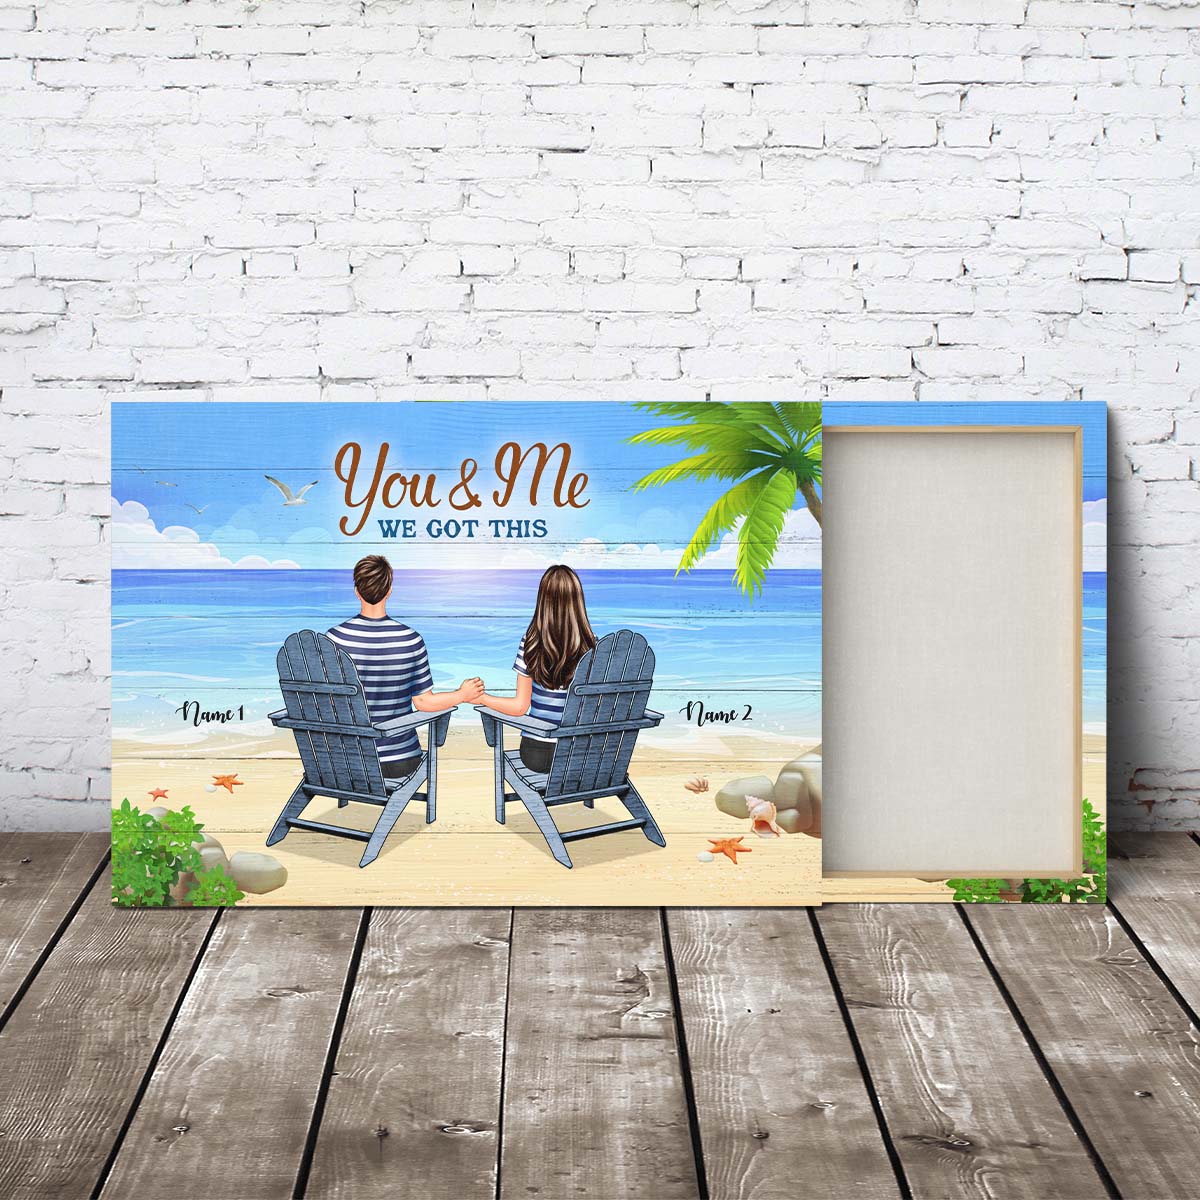 Back View Couple Sitting Beach Built A Life We Loved Personalized Custom Wall Art Canvas Print Valentine Gift for Couple Wife Girlfriend Husband